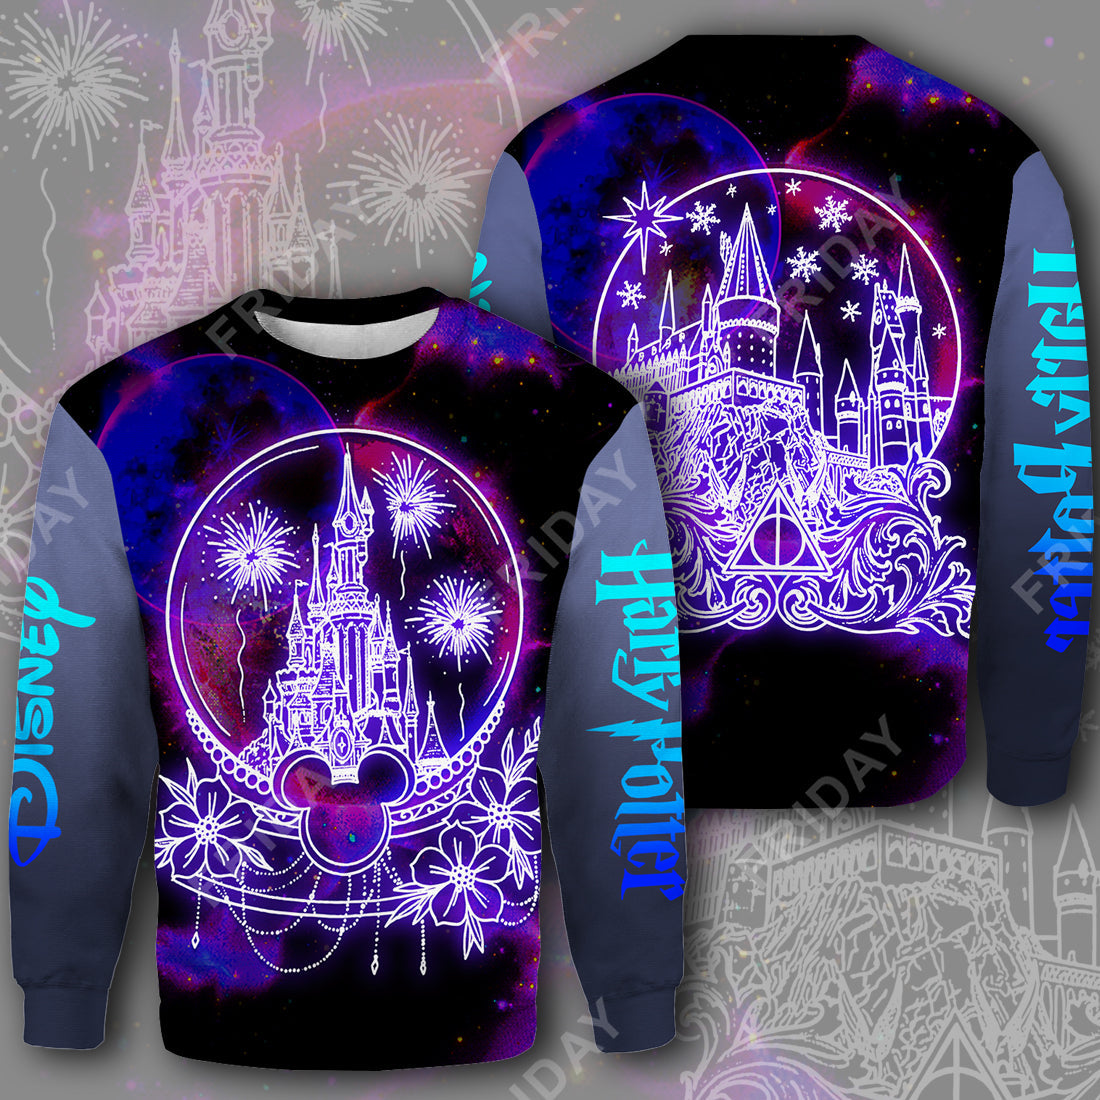 Unifinz DN HP T-shirt DN and HP Castle In Glass Sphere 3D Print T-shirt Amazing High Quality  DN HP Hoodie Sweater Tank  2025